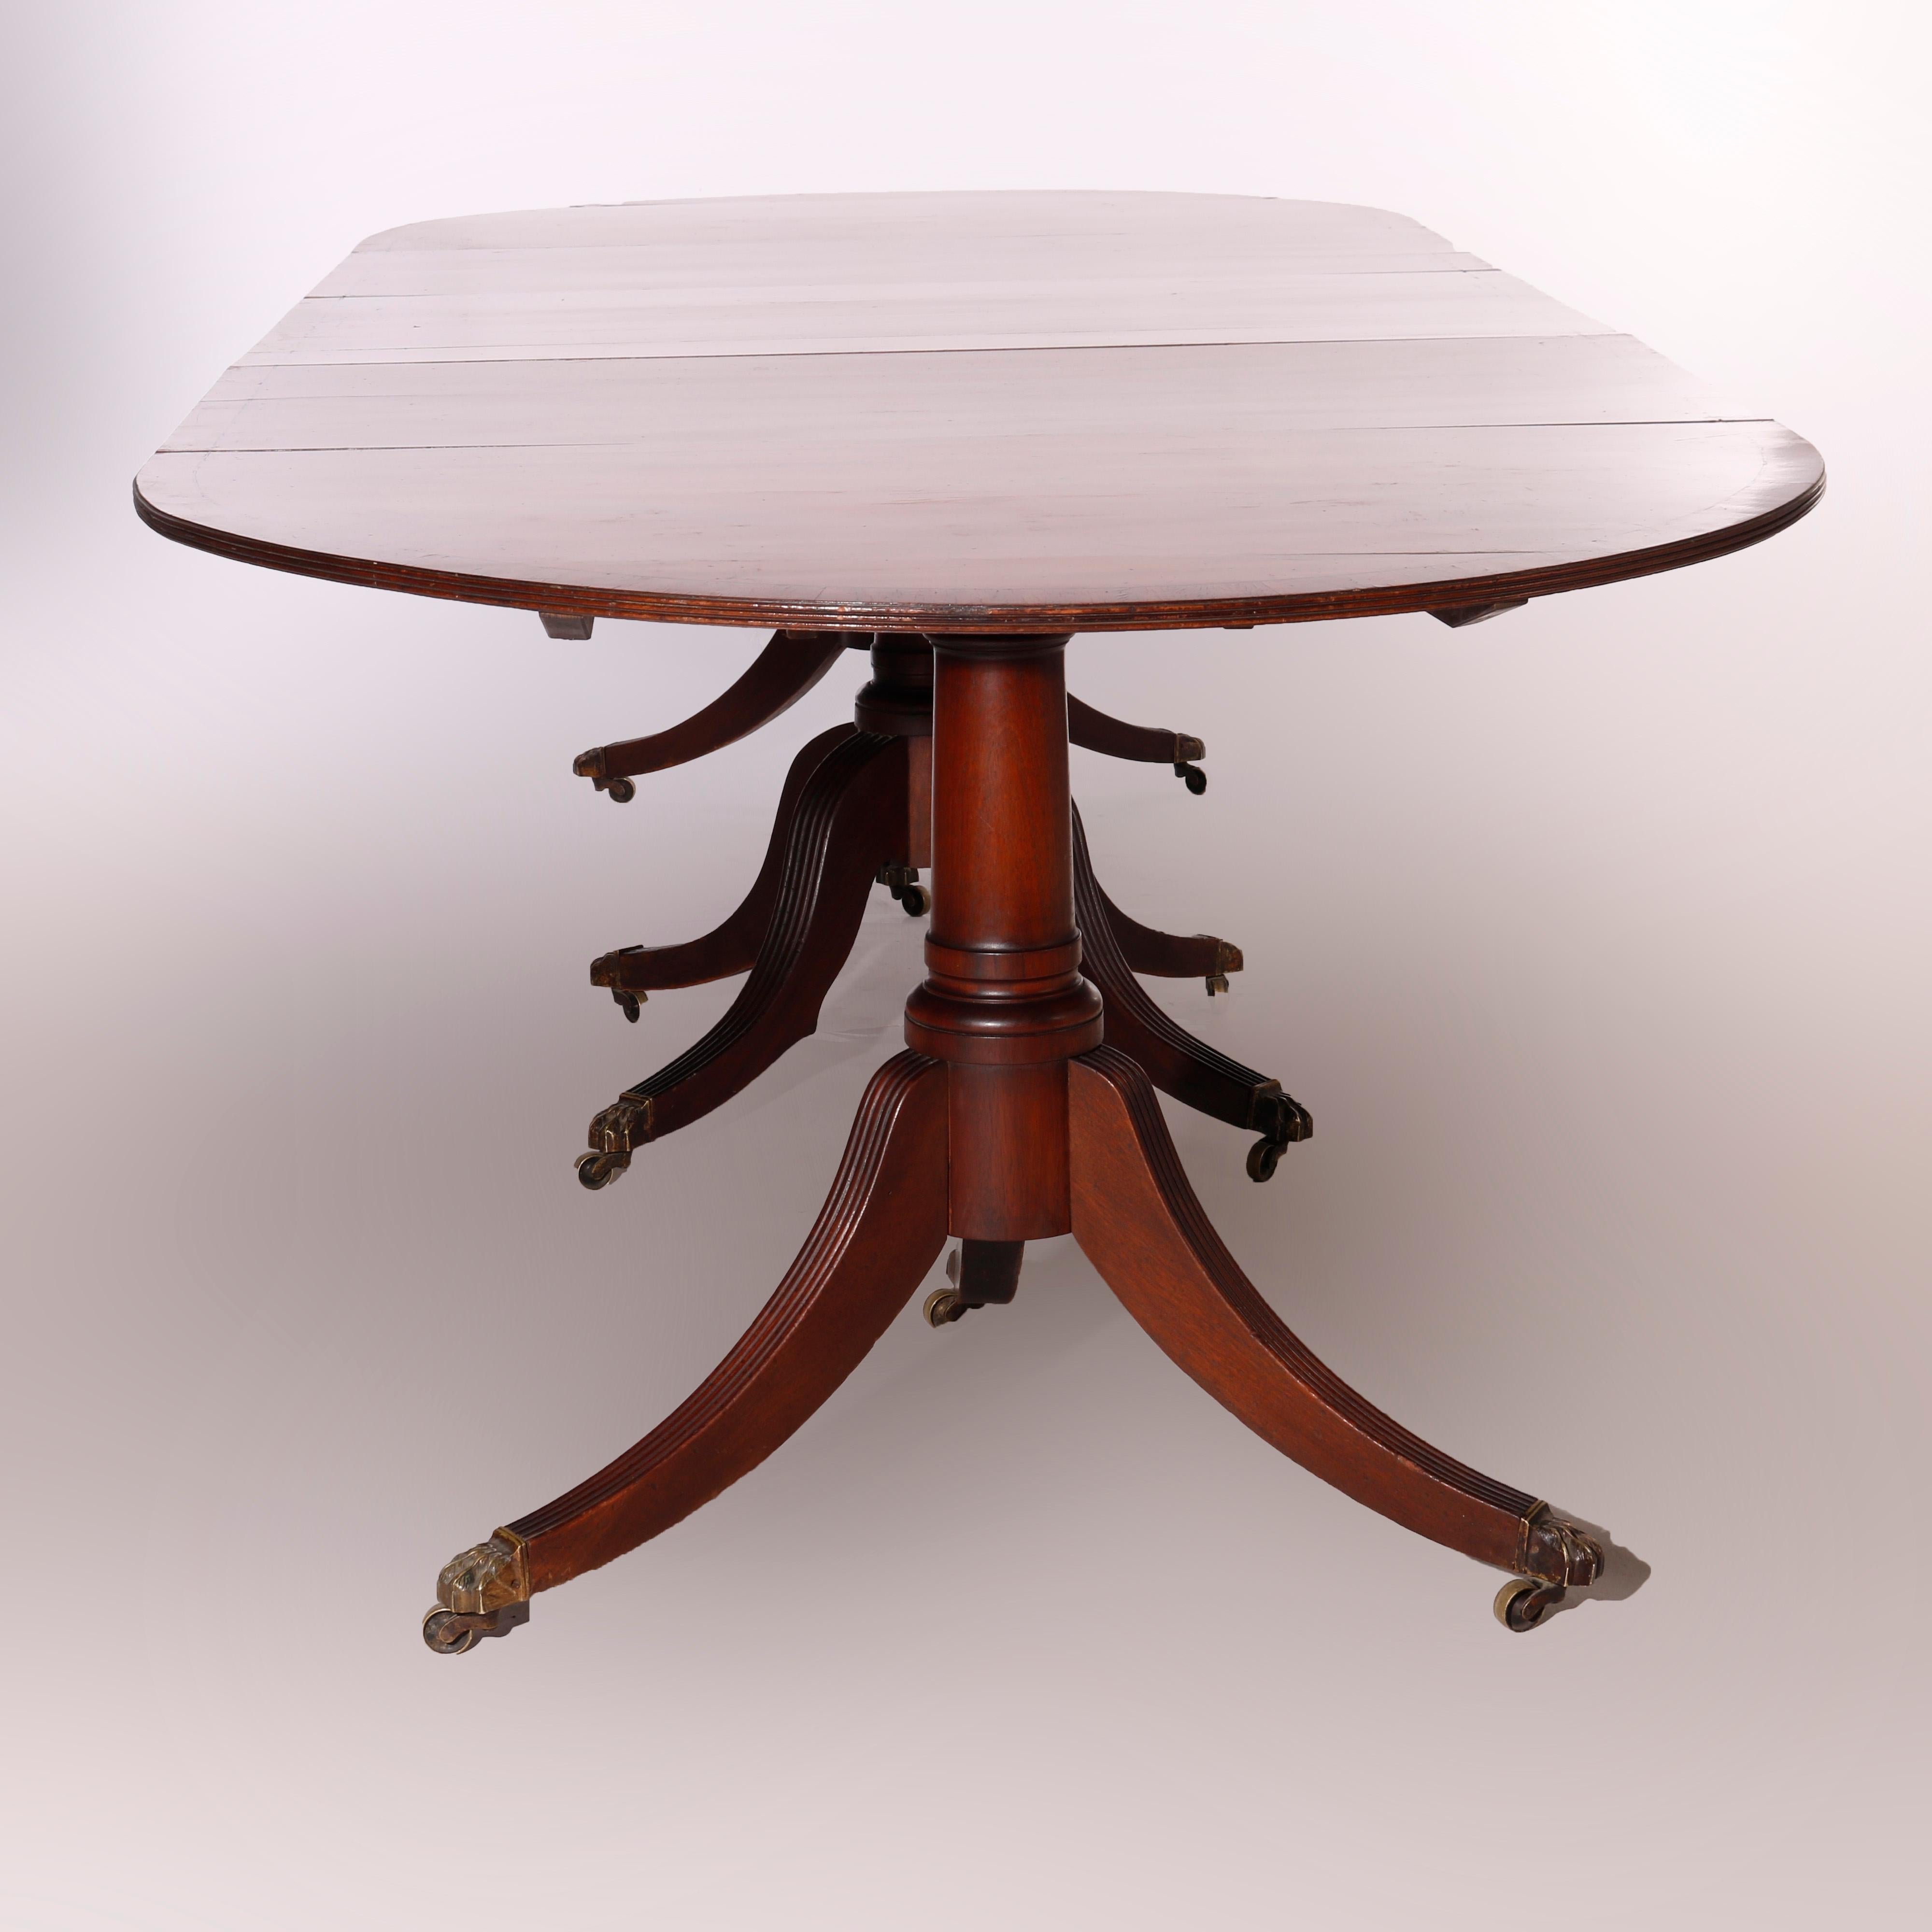 An antique Georgian style dining table offers mahogany construction with cross banded top having ebonized banding raised on reeded convex legs, separates into three parts and accommodates two leaves, 19th century

Measures - without leaves 29''H x